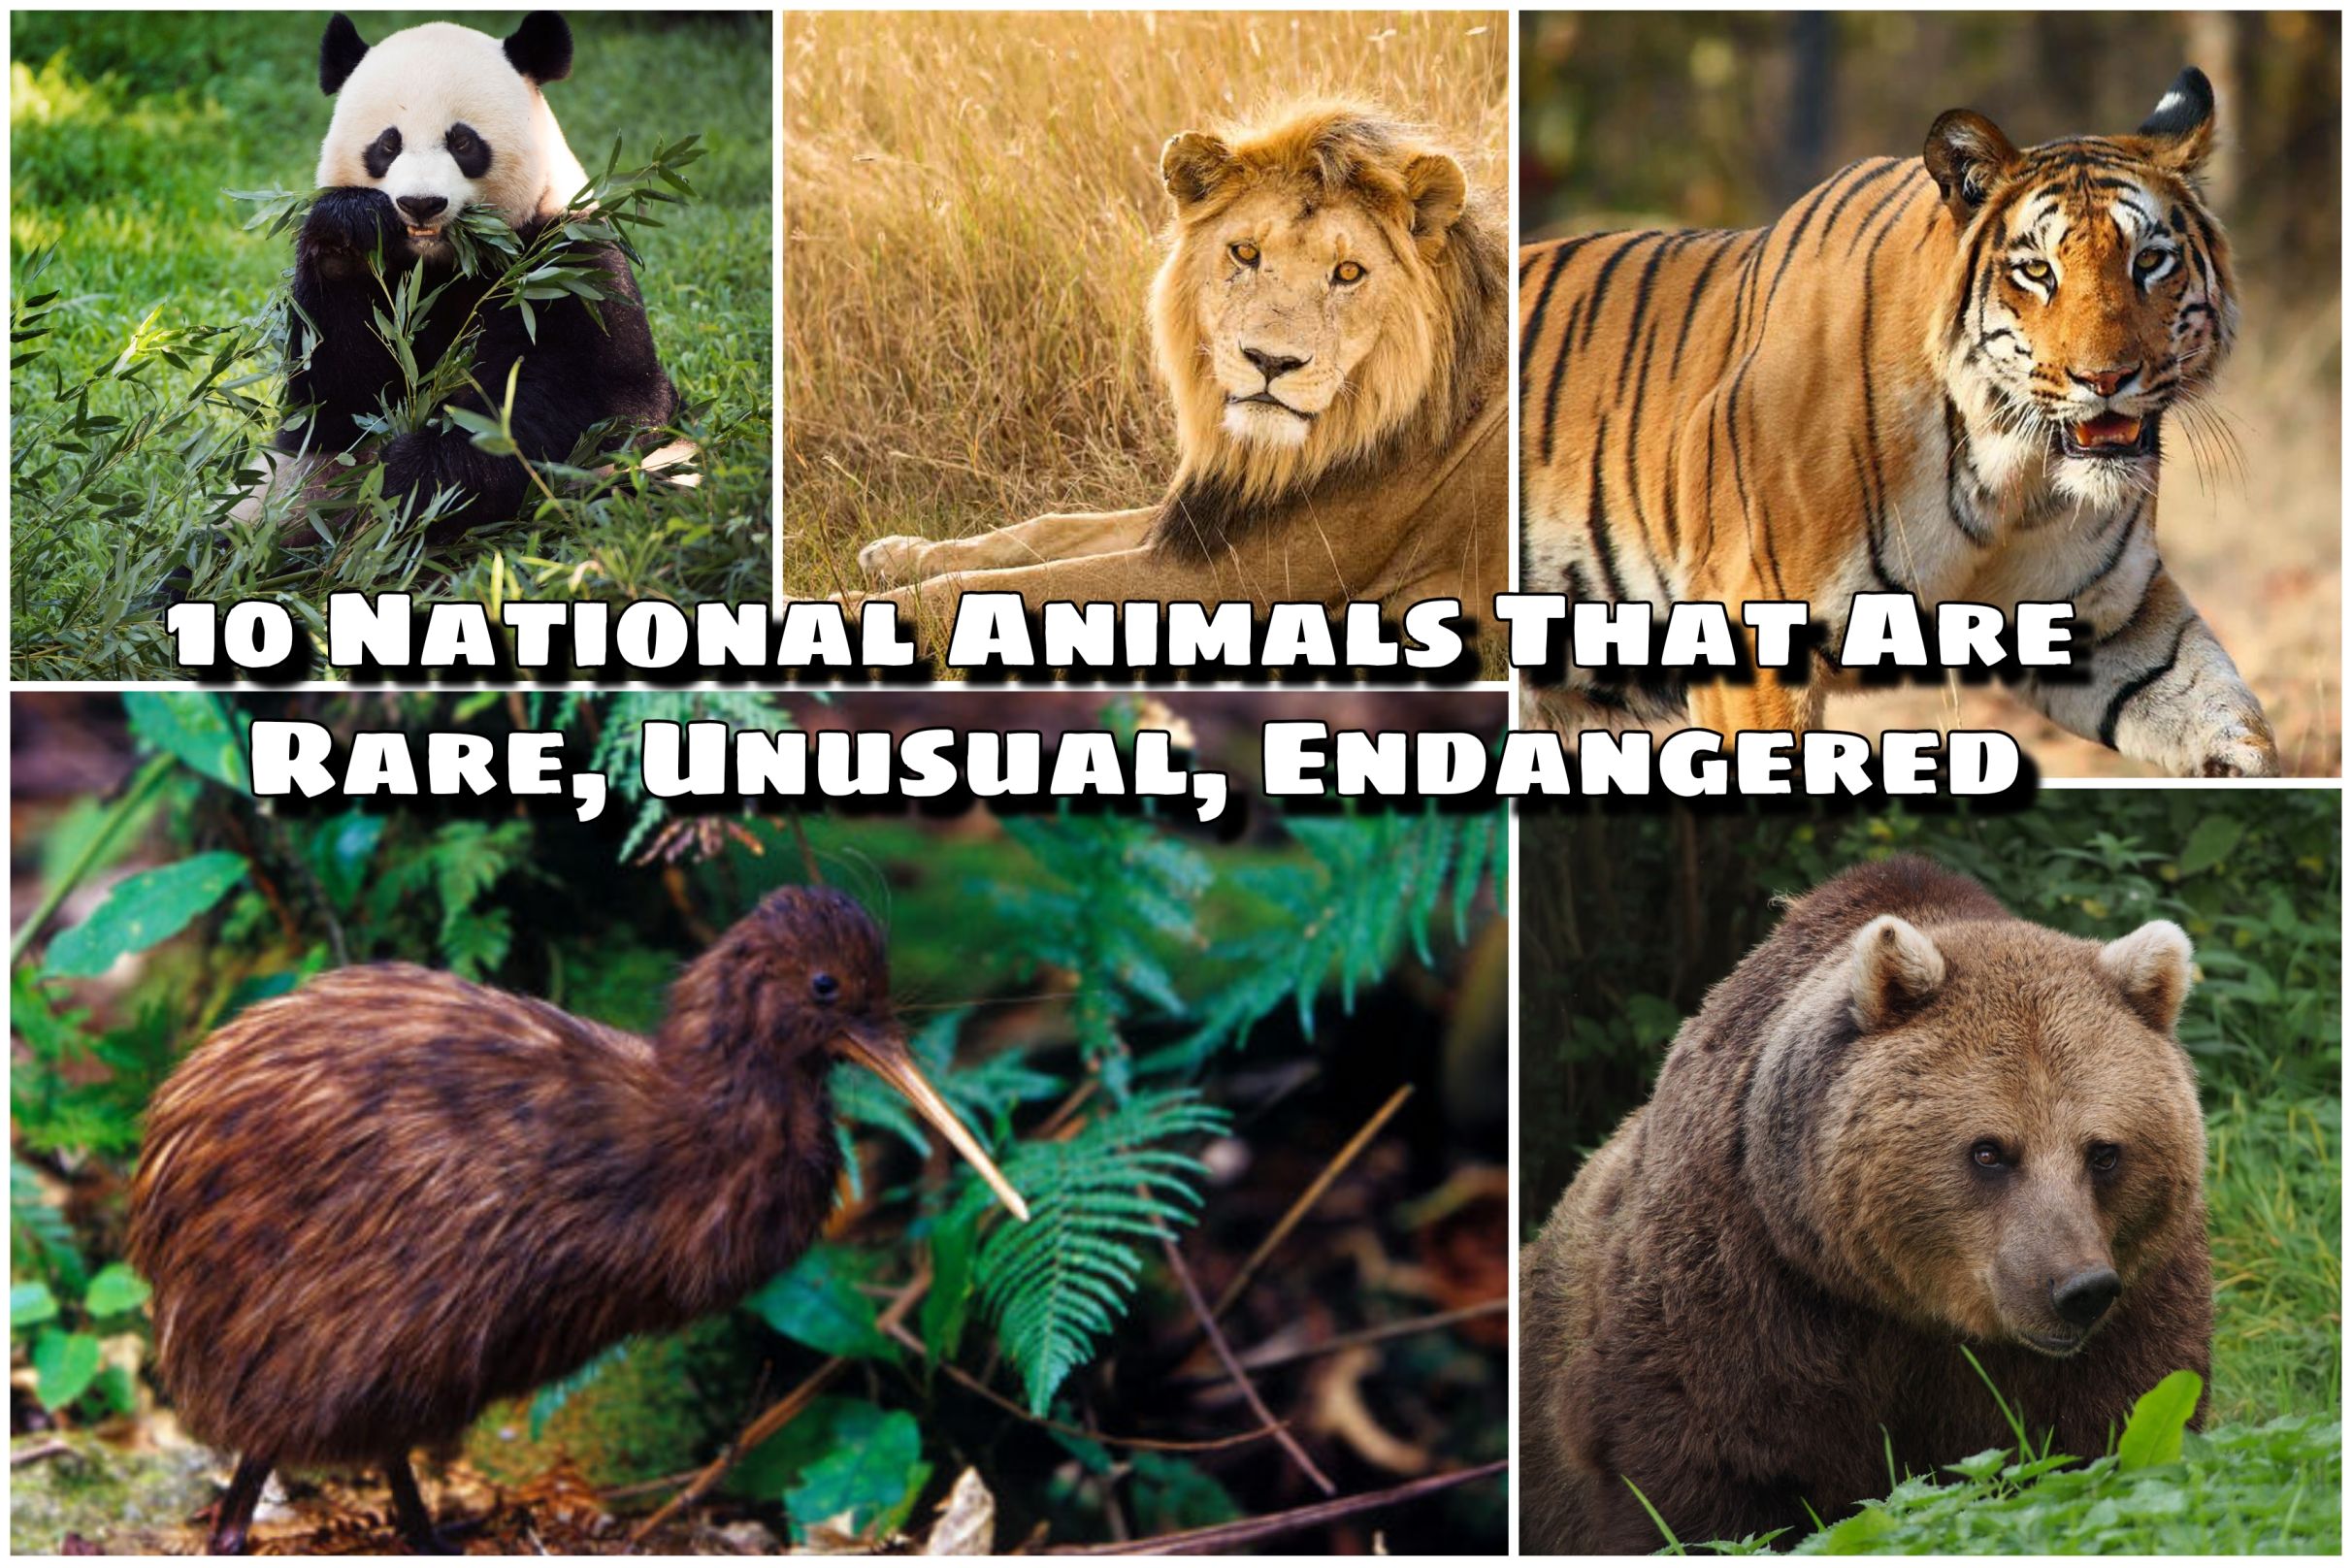 10 National Animals That Are Rare, Unusual, Endangered